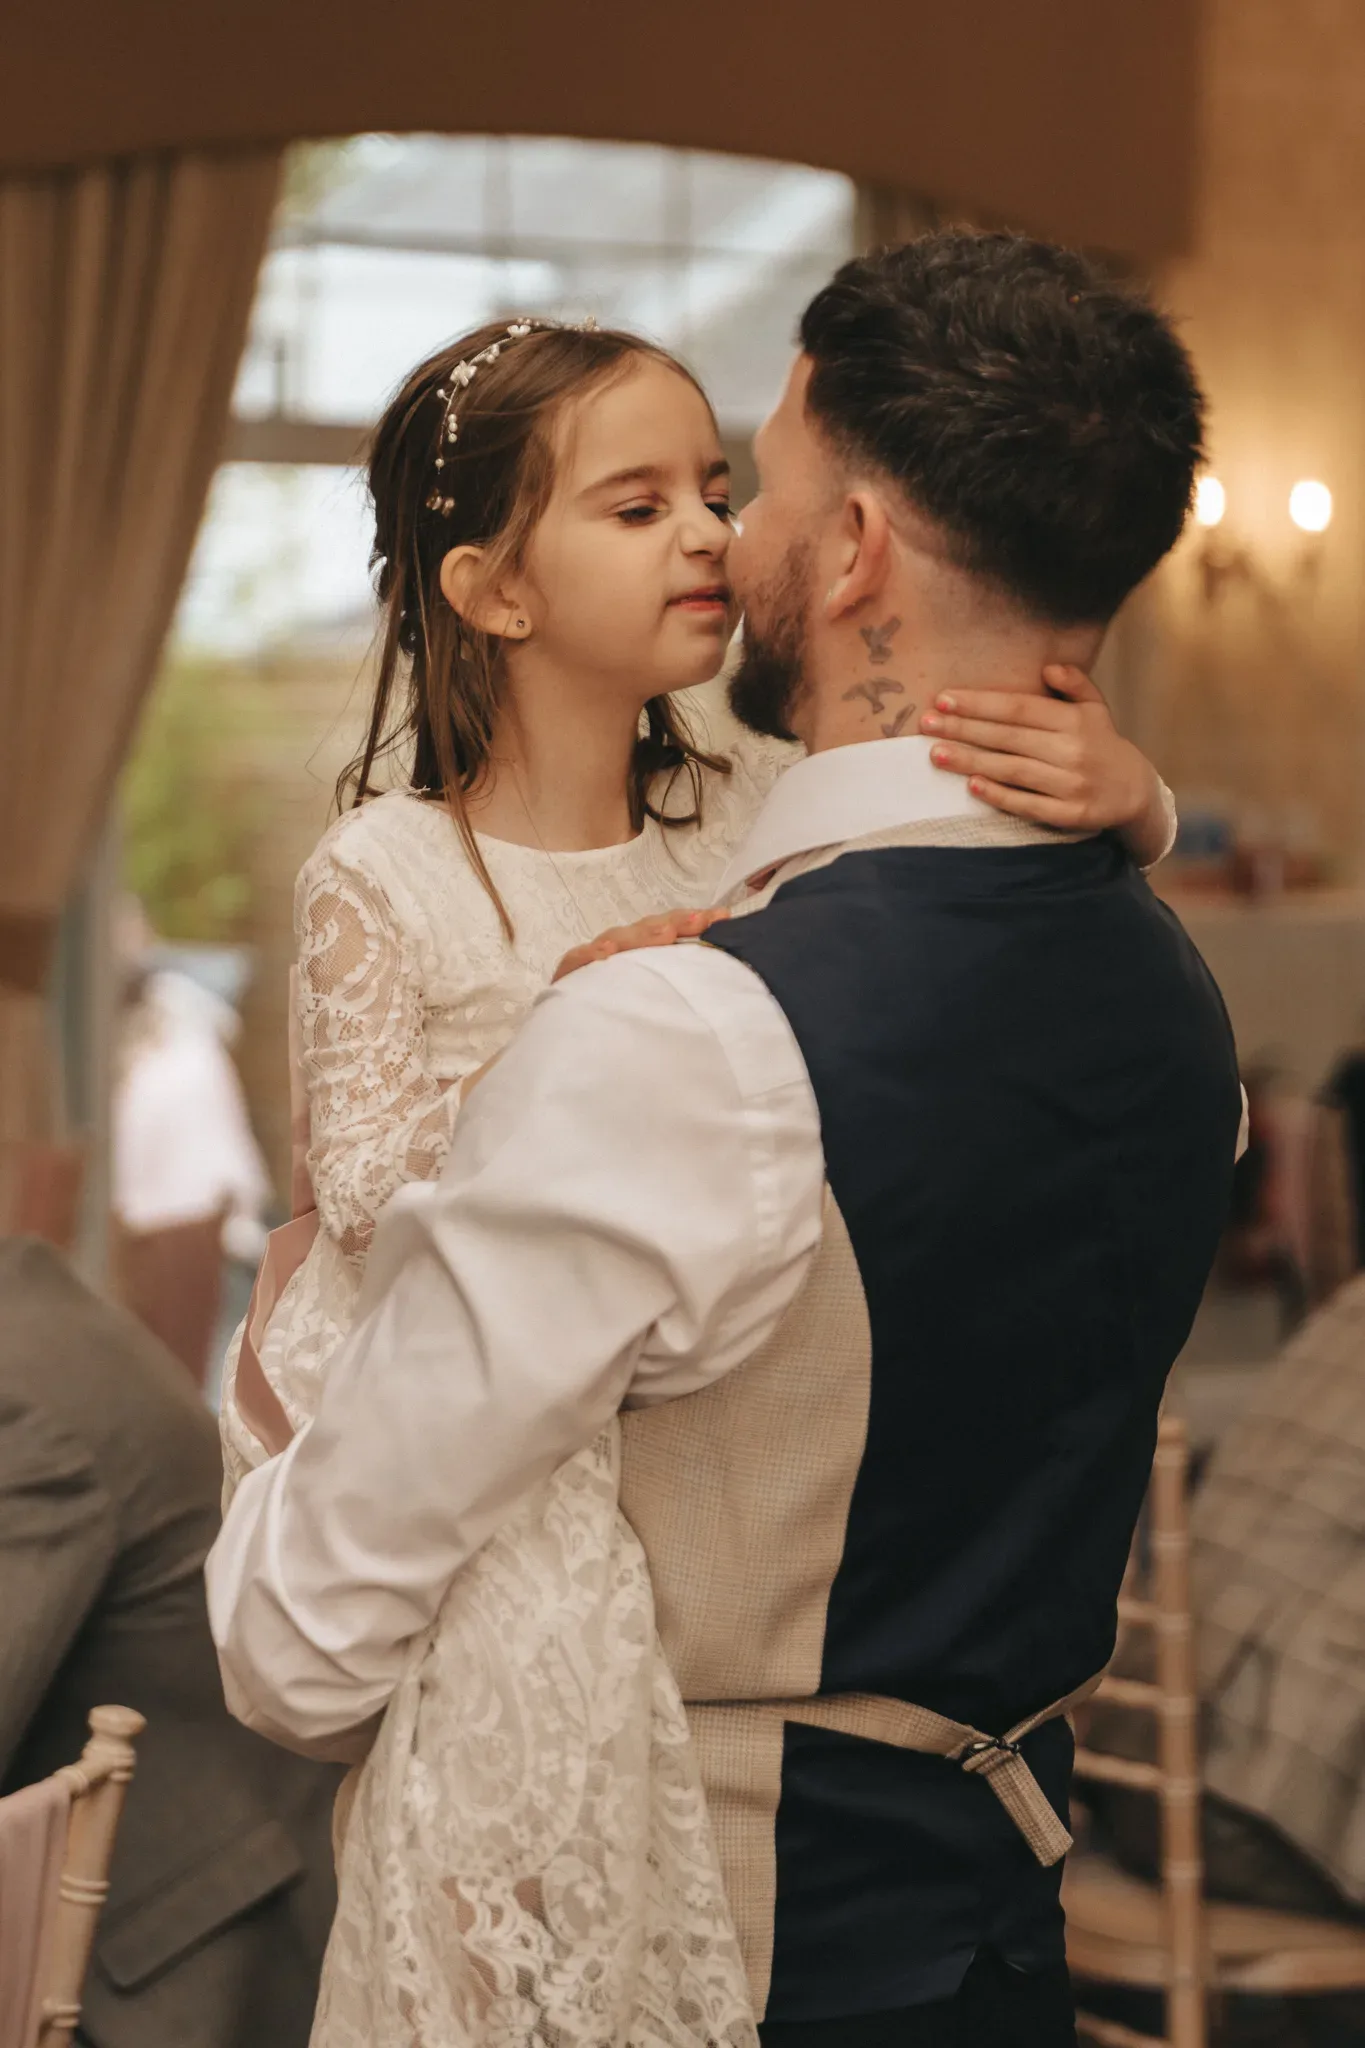 A young girl in a white lace dress embraces a bearded man in a formal vest and rolled-up sleeves. she touches his cheek affectionately as they share a tender moment in a warmly lit indoor setting.